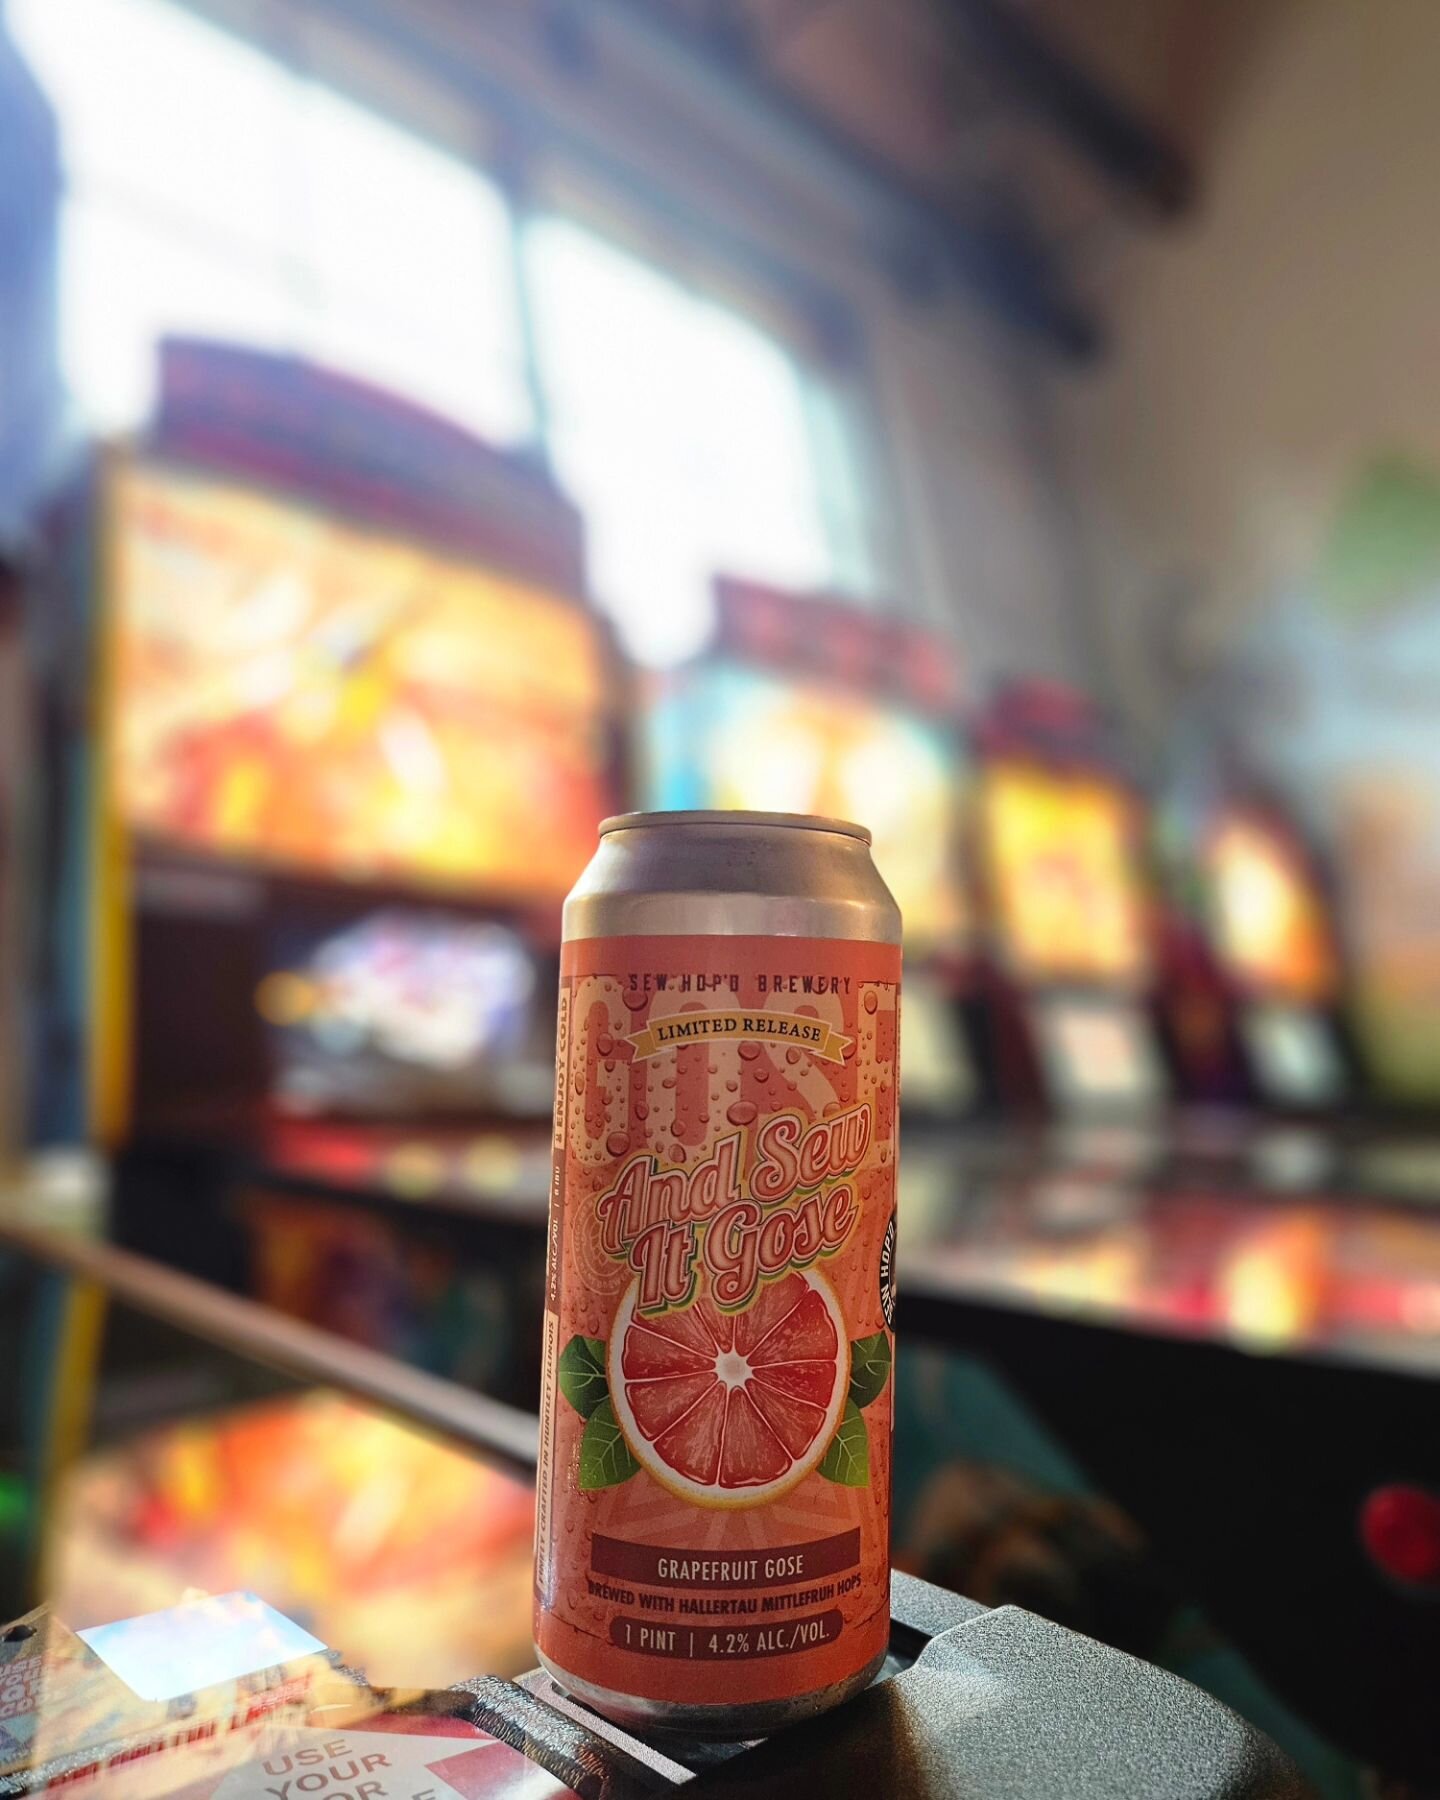 Calling all pinheads! Join us tonight for the Stern Army monthly pinball tournament! Check-in starts at 6 pm, open to all skill levels. Exciting prizes await! Don't miss out on @forknfrypoutine they'll be pulling up to the taproom from 5-8 pm. See yo